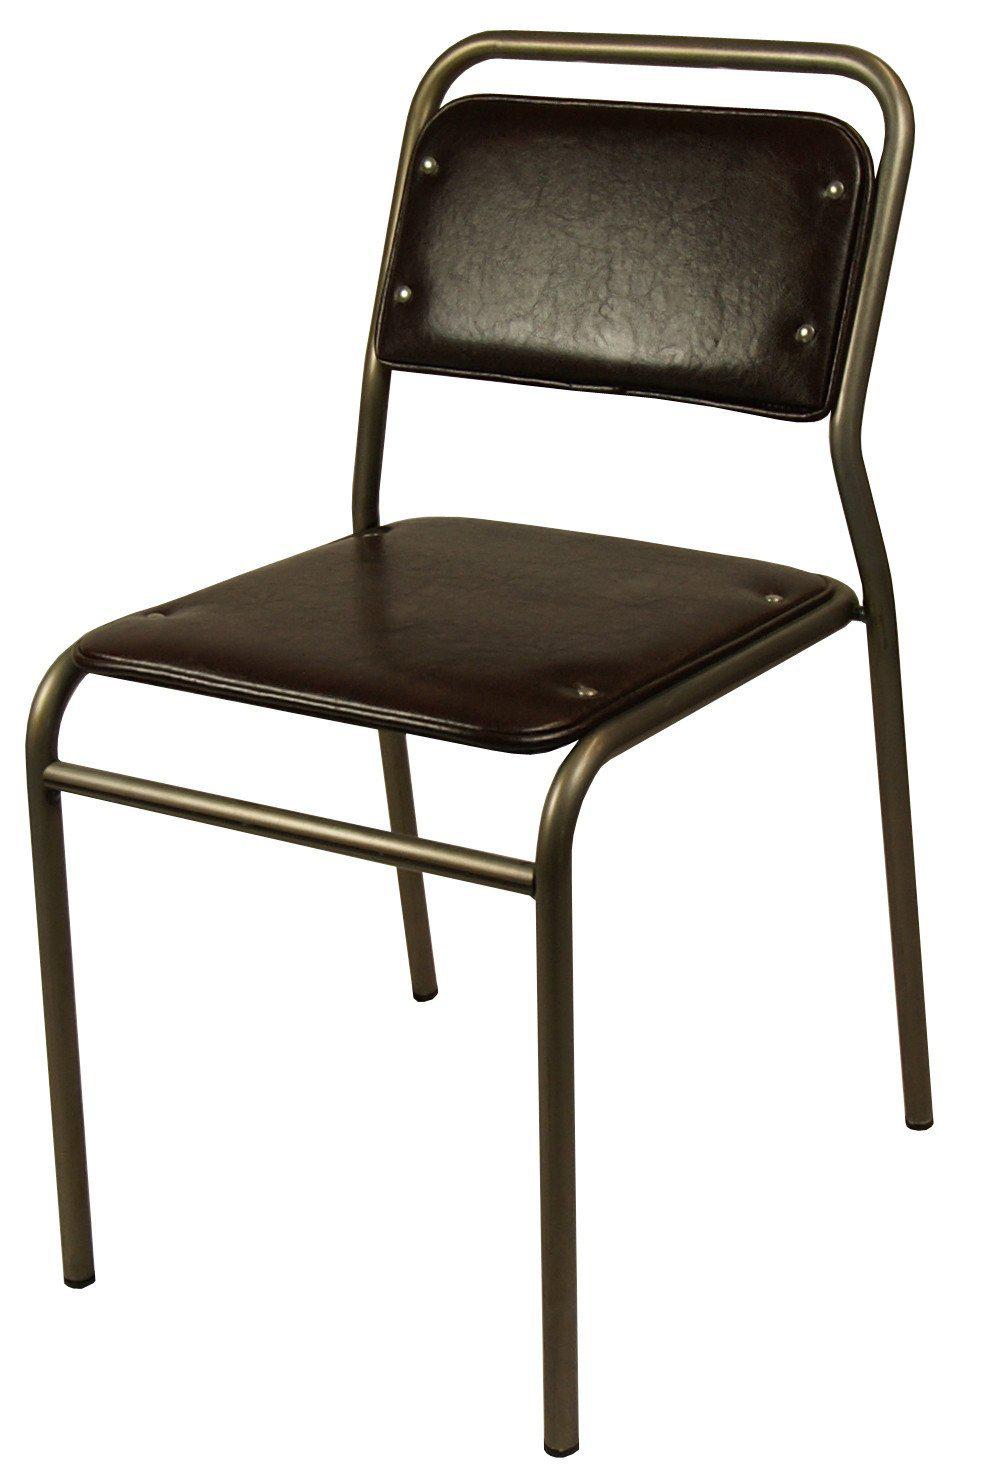 Trevi Side Chair-Alutec-Contract Furniture Store